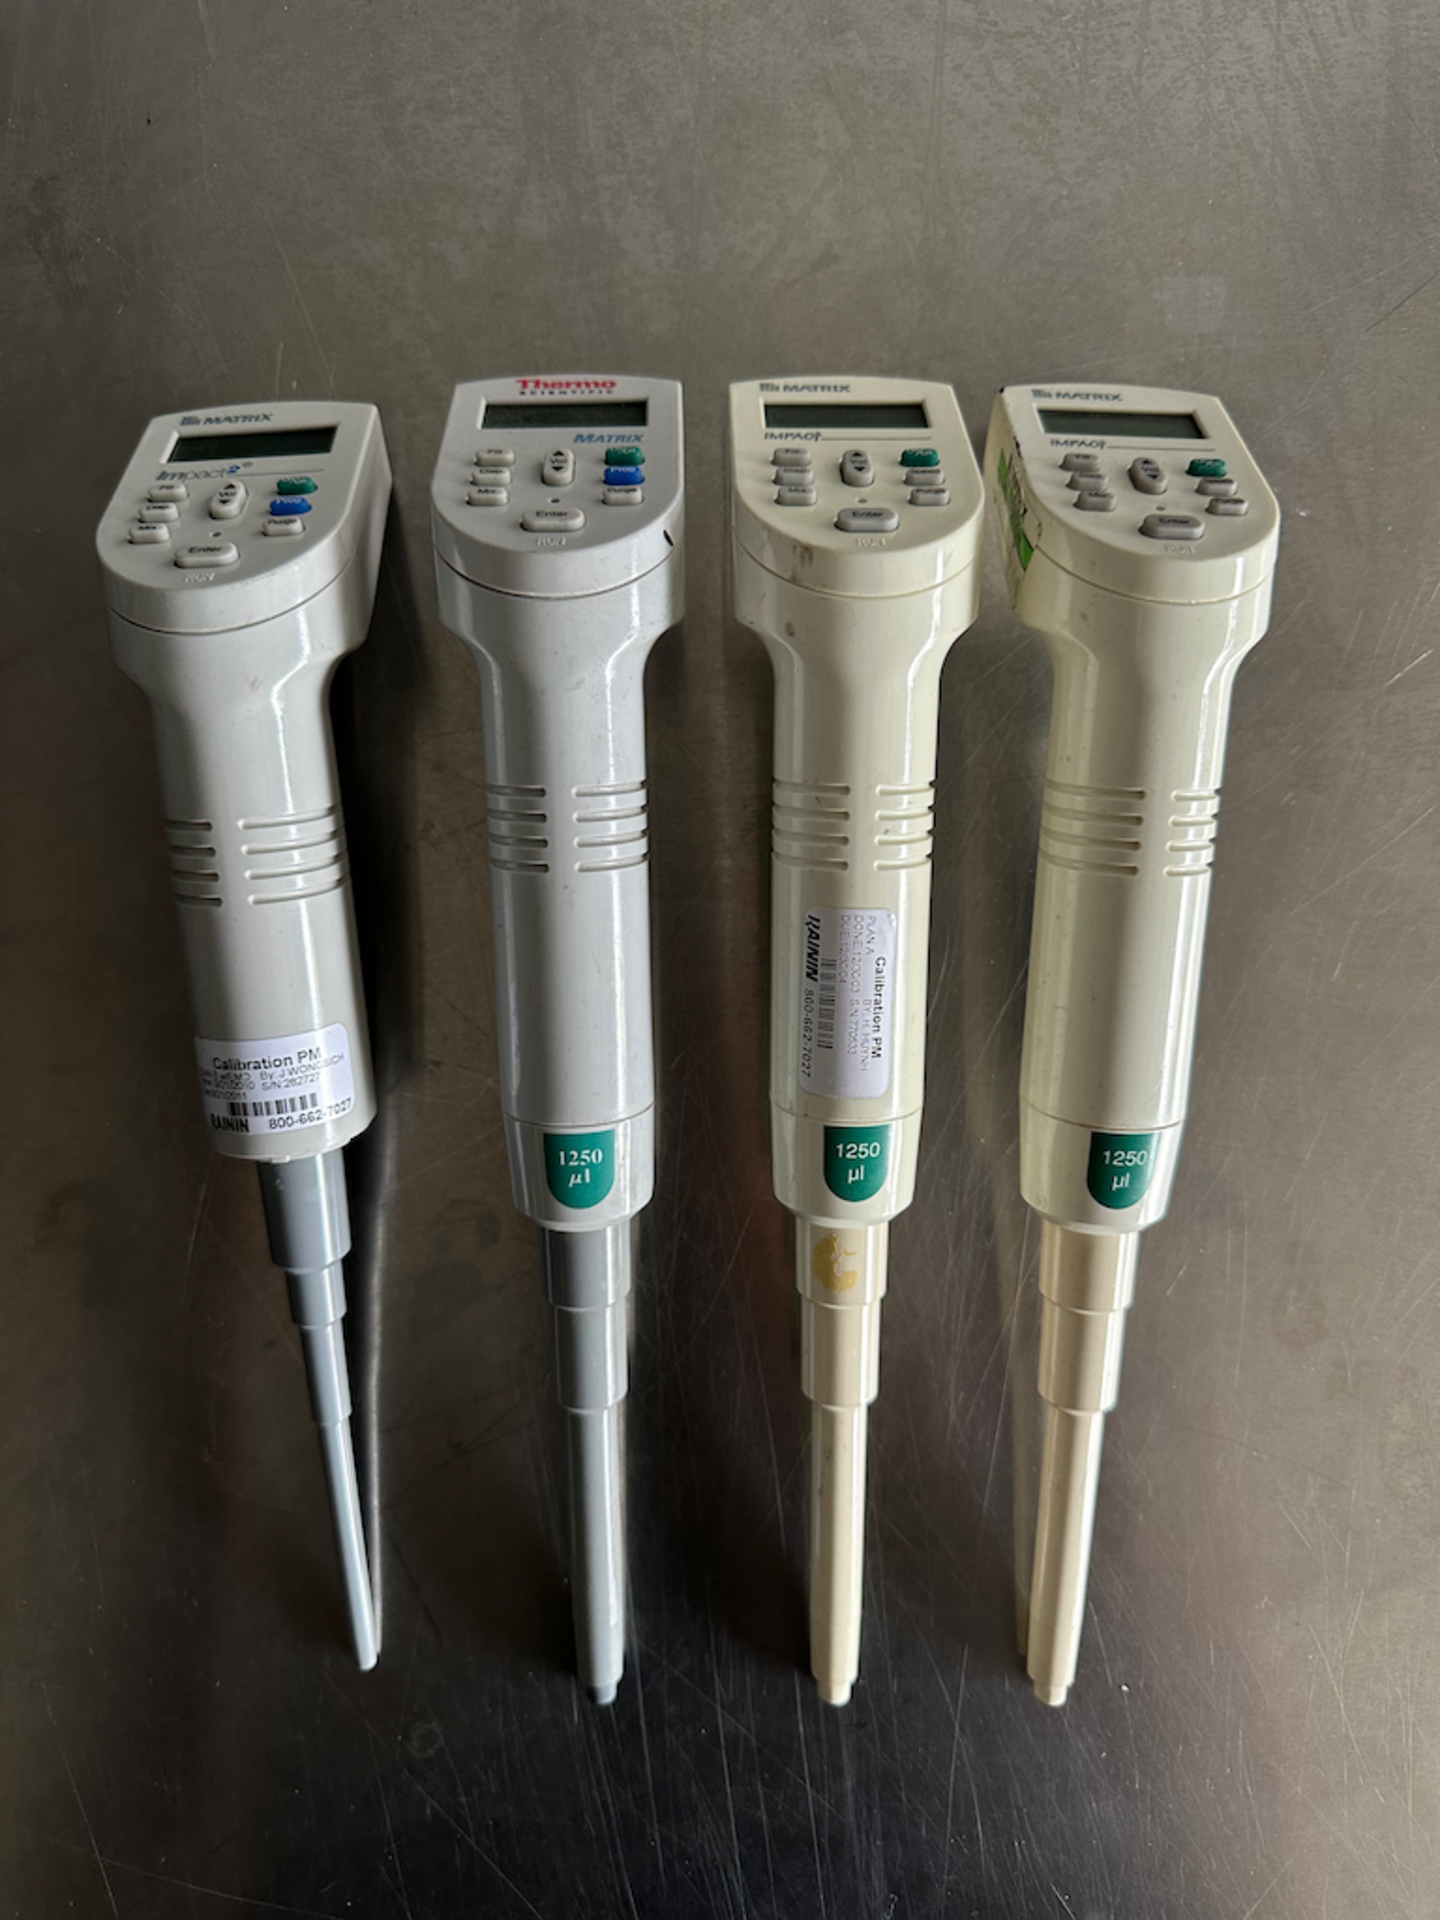 Lot: Consisting of Qty-4 Pipettes to include Qty-3 MATRIX Impact Pipettes & Qty-1 Thermo Scientific